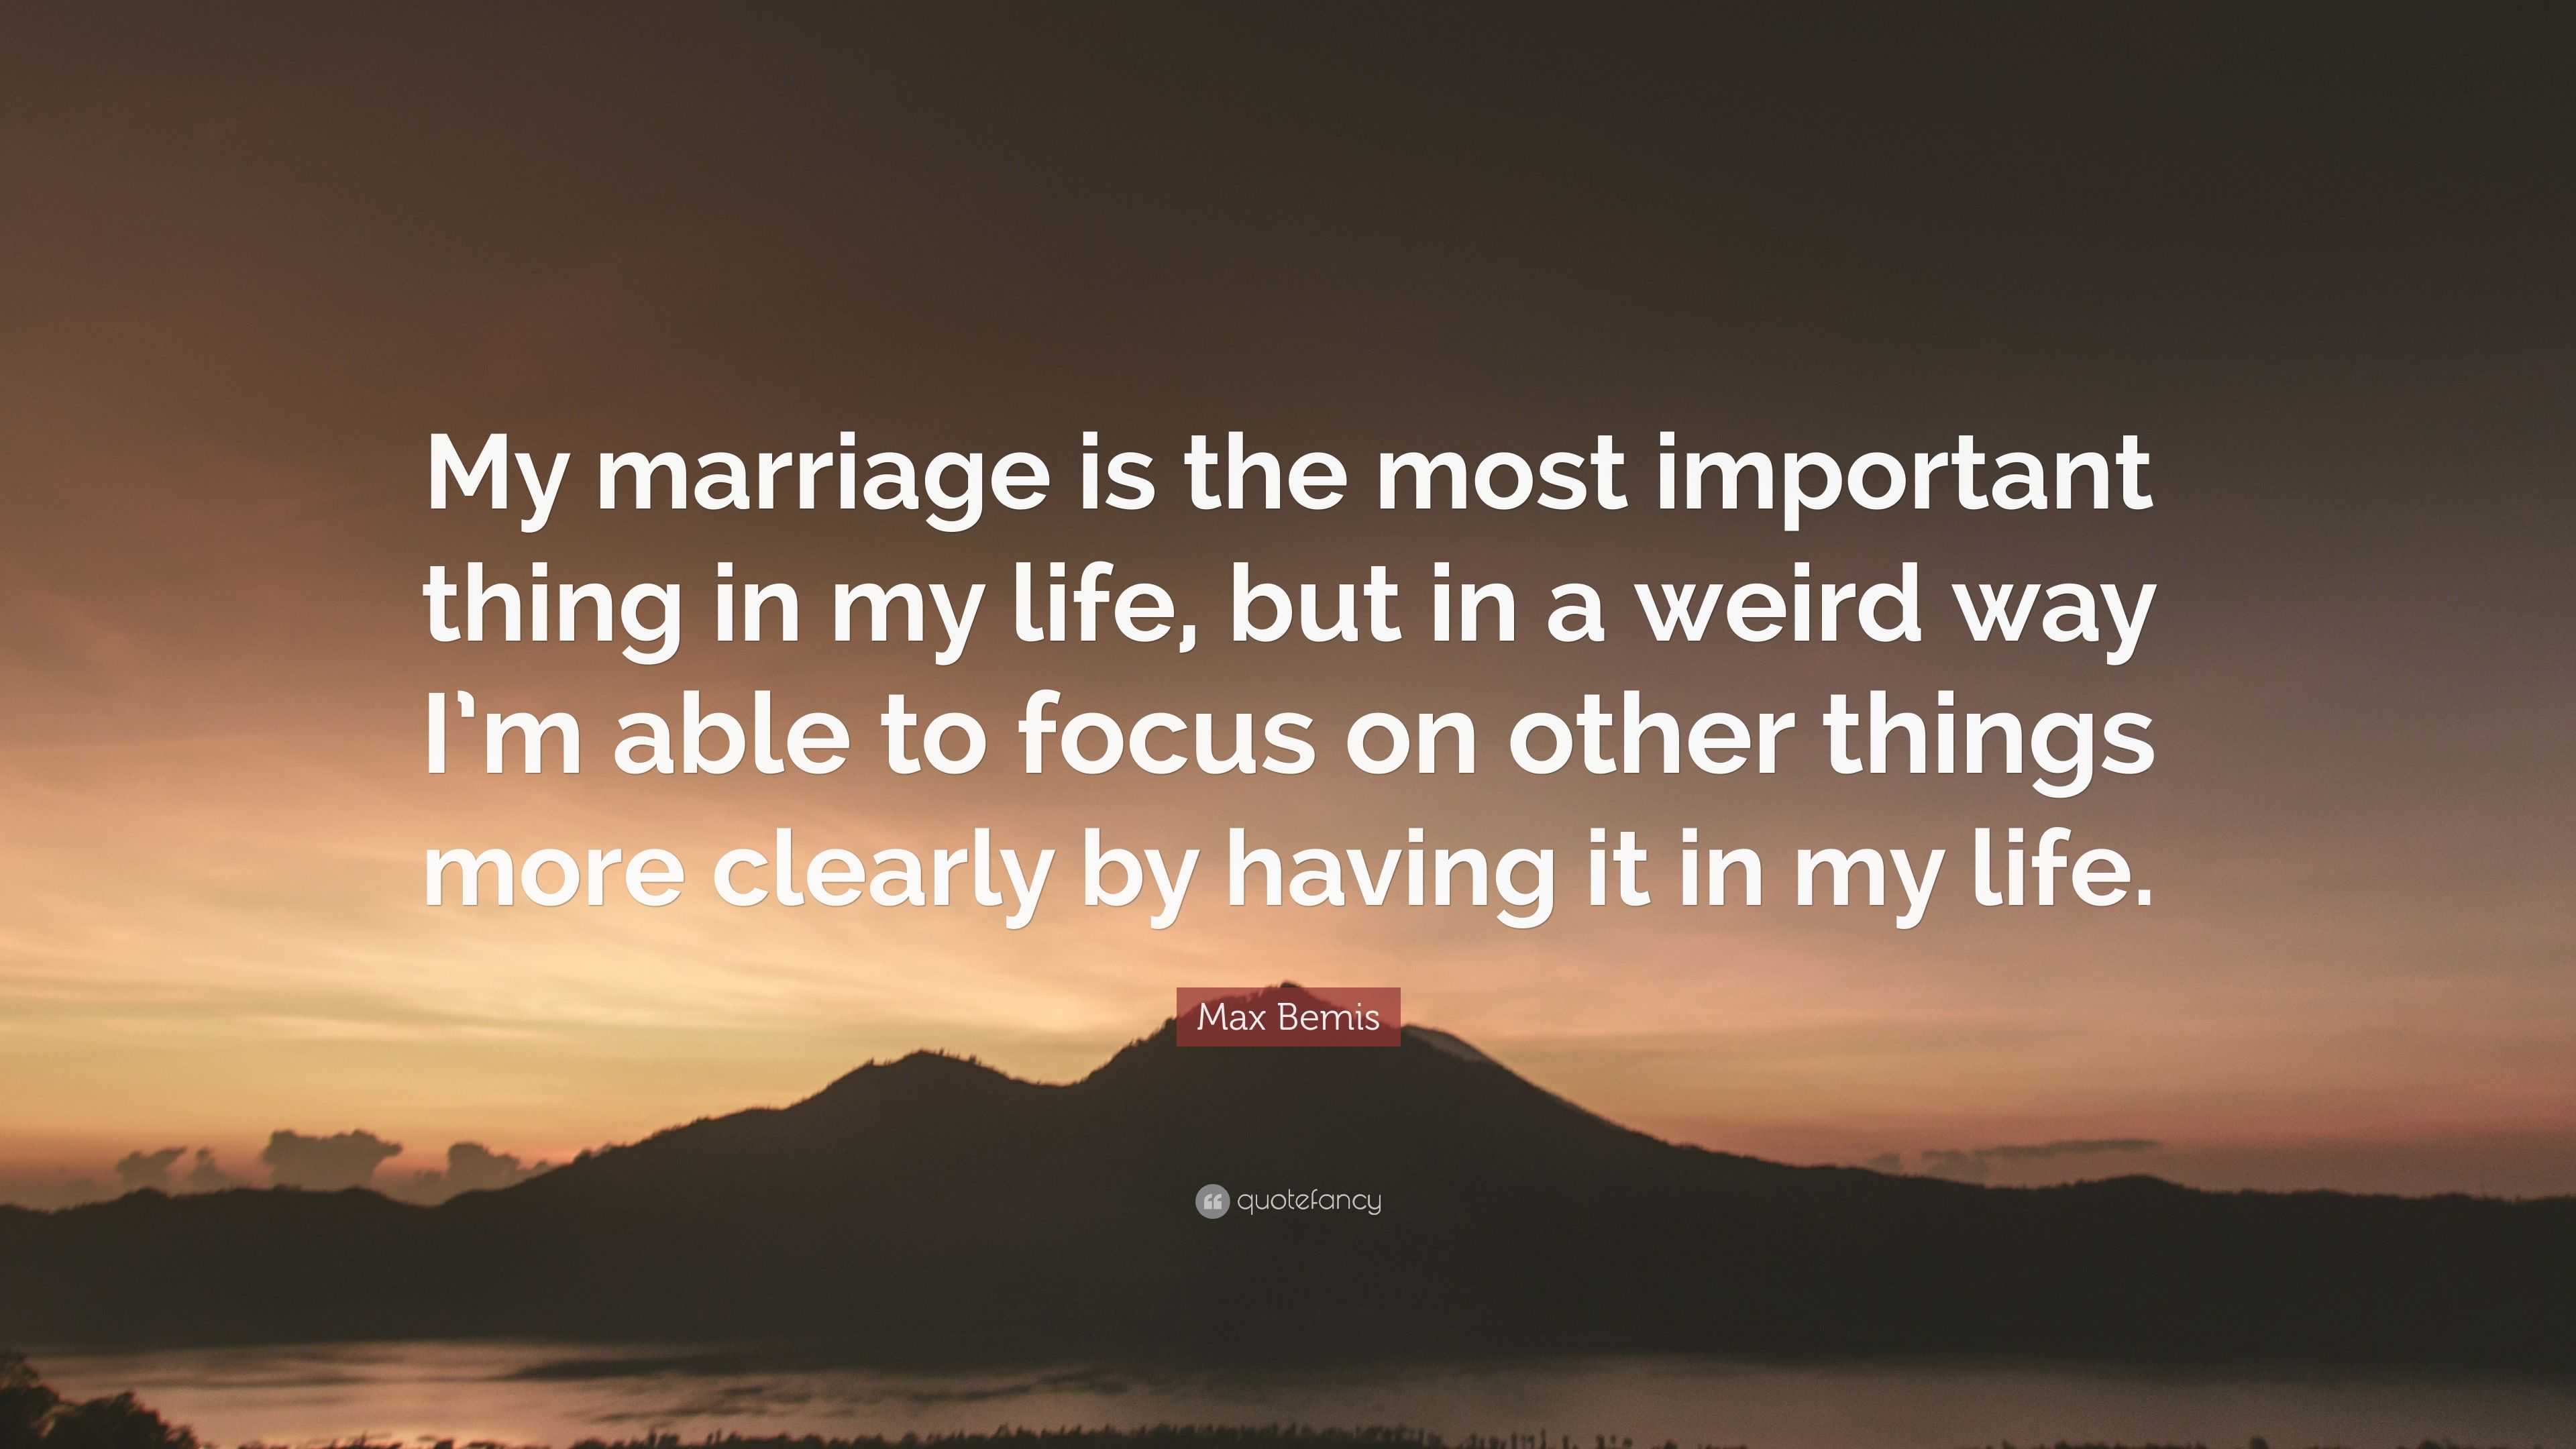 Max Bemis Quote: “My marriage is the most important thing in my life ...